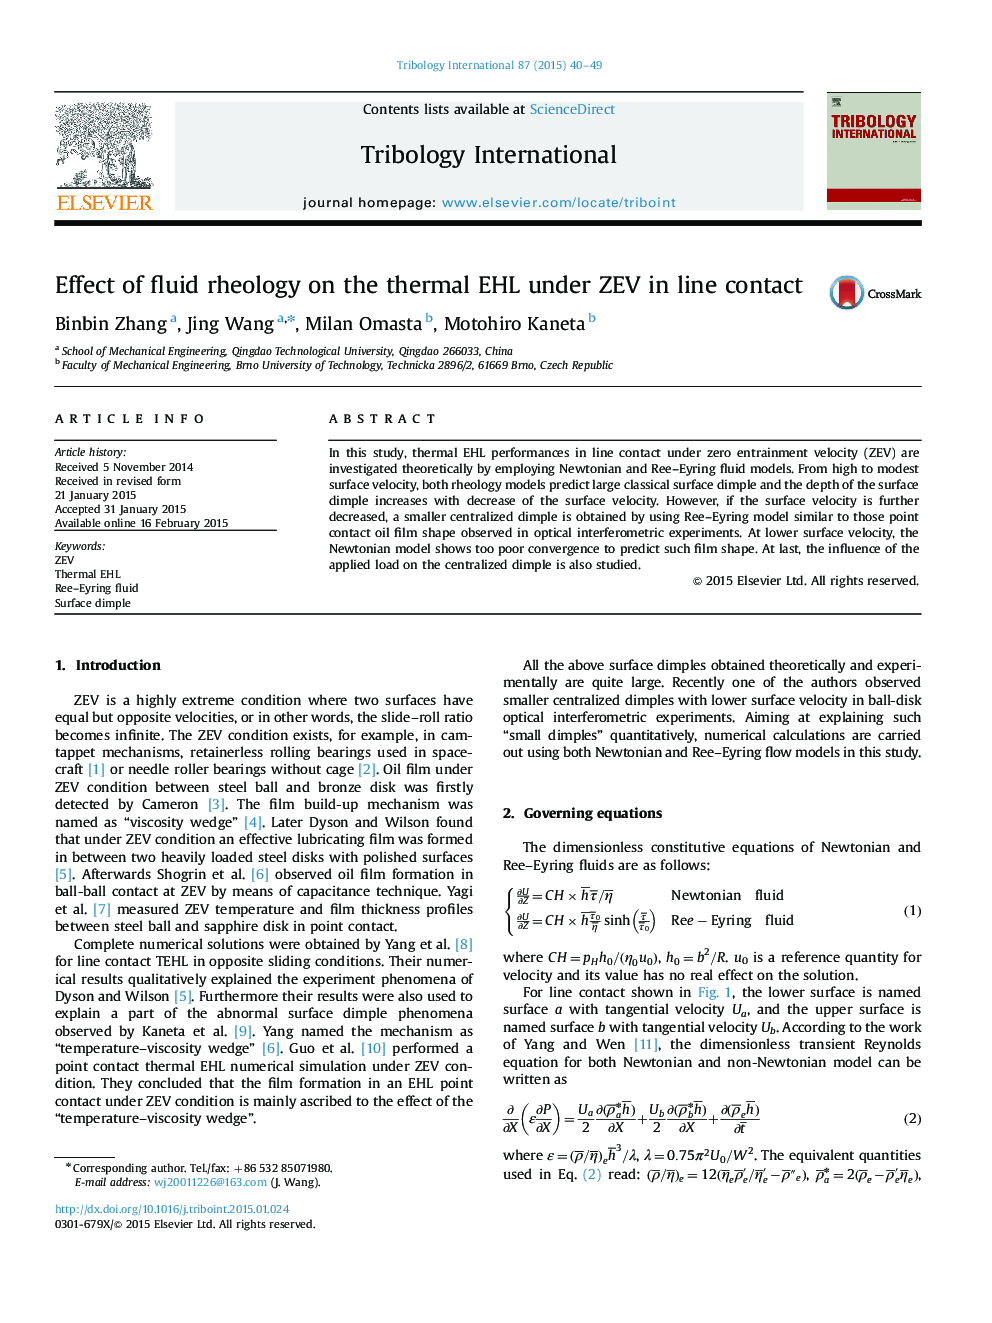 Effect of fluid rheology on the thermal EHL under ZEV in line contact